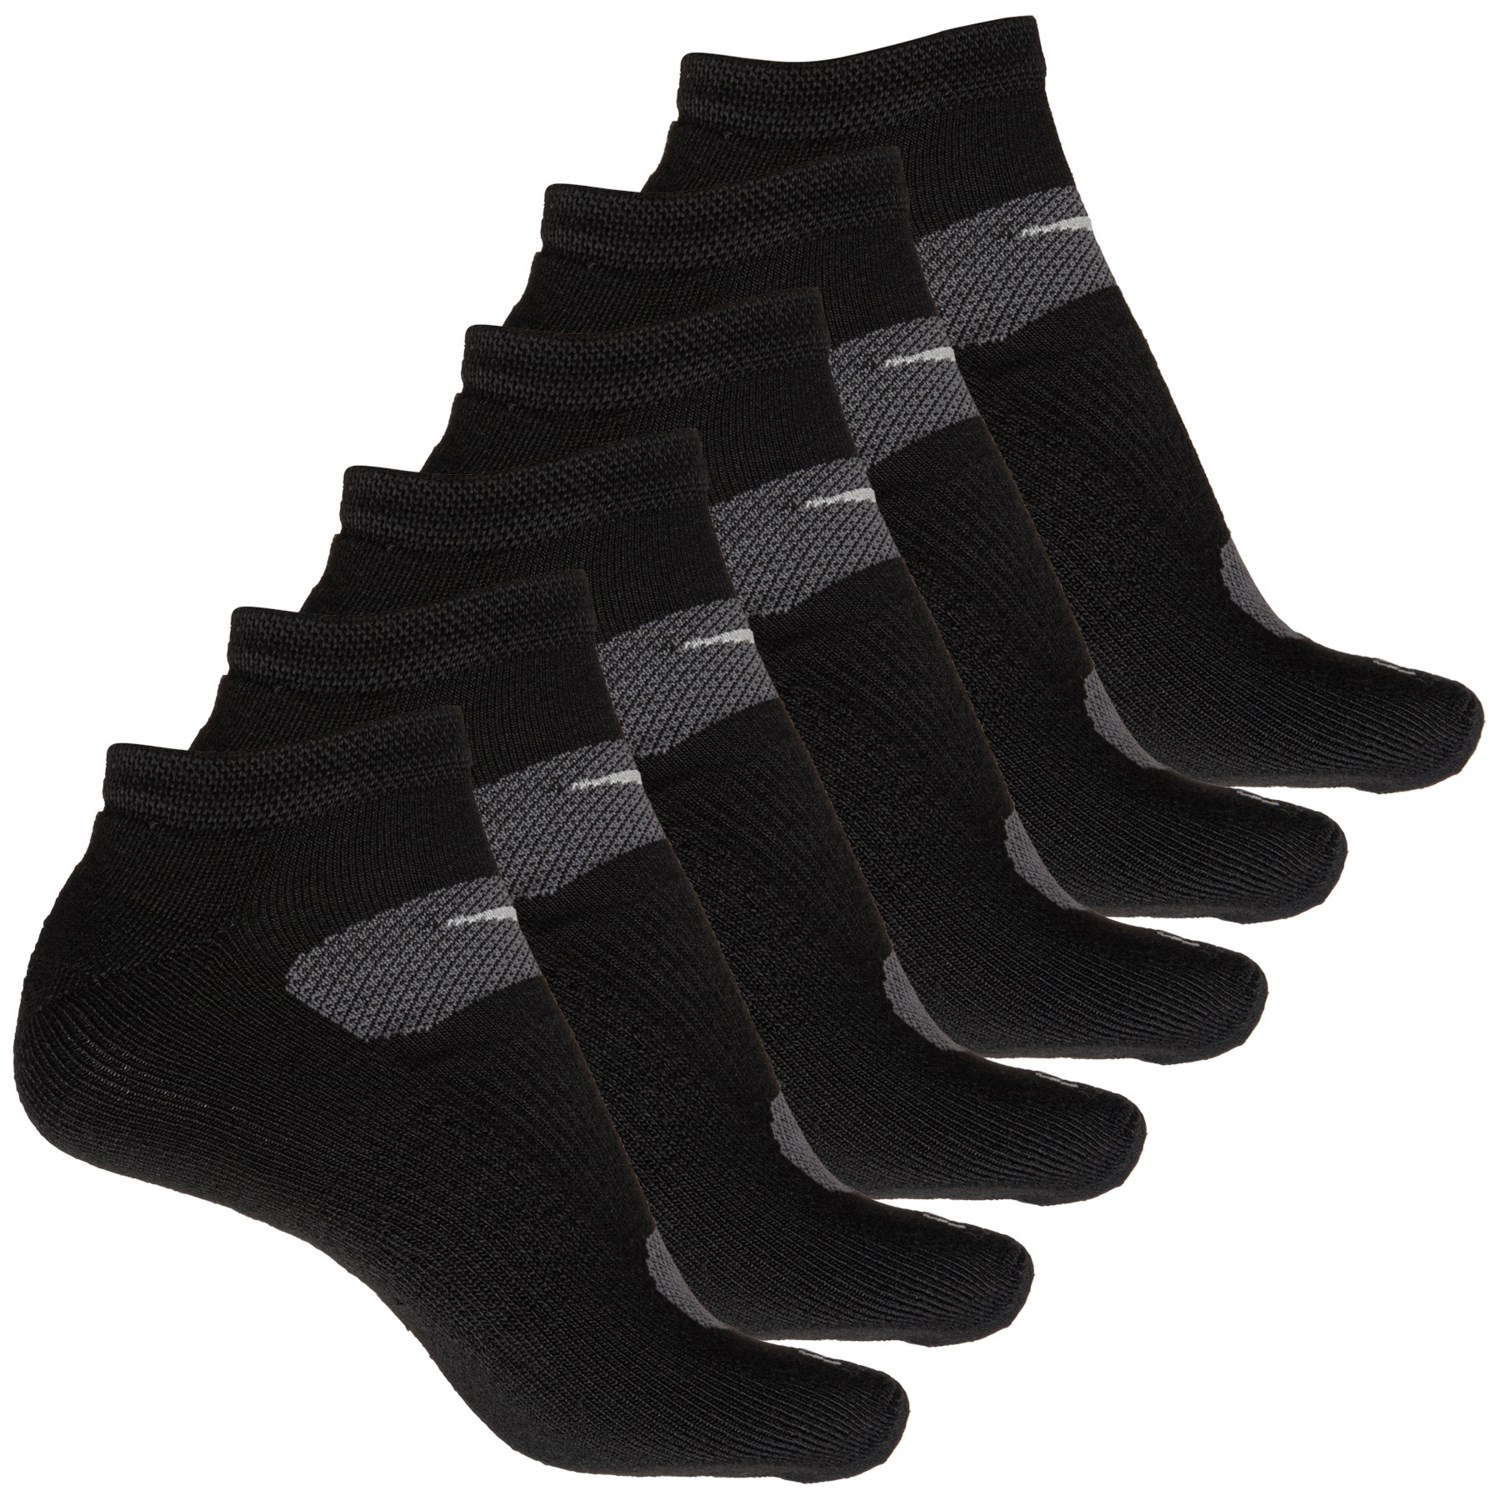 Saucony Legacy No-Show Socks (For Women) - Save 20%